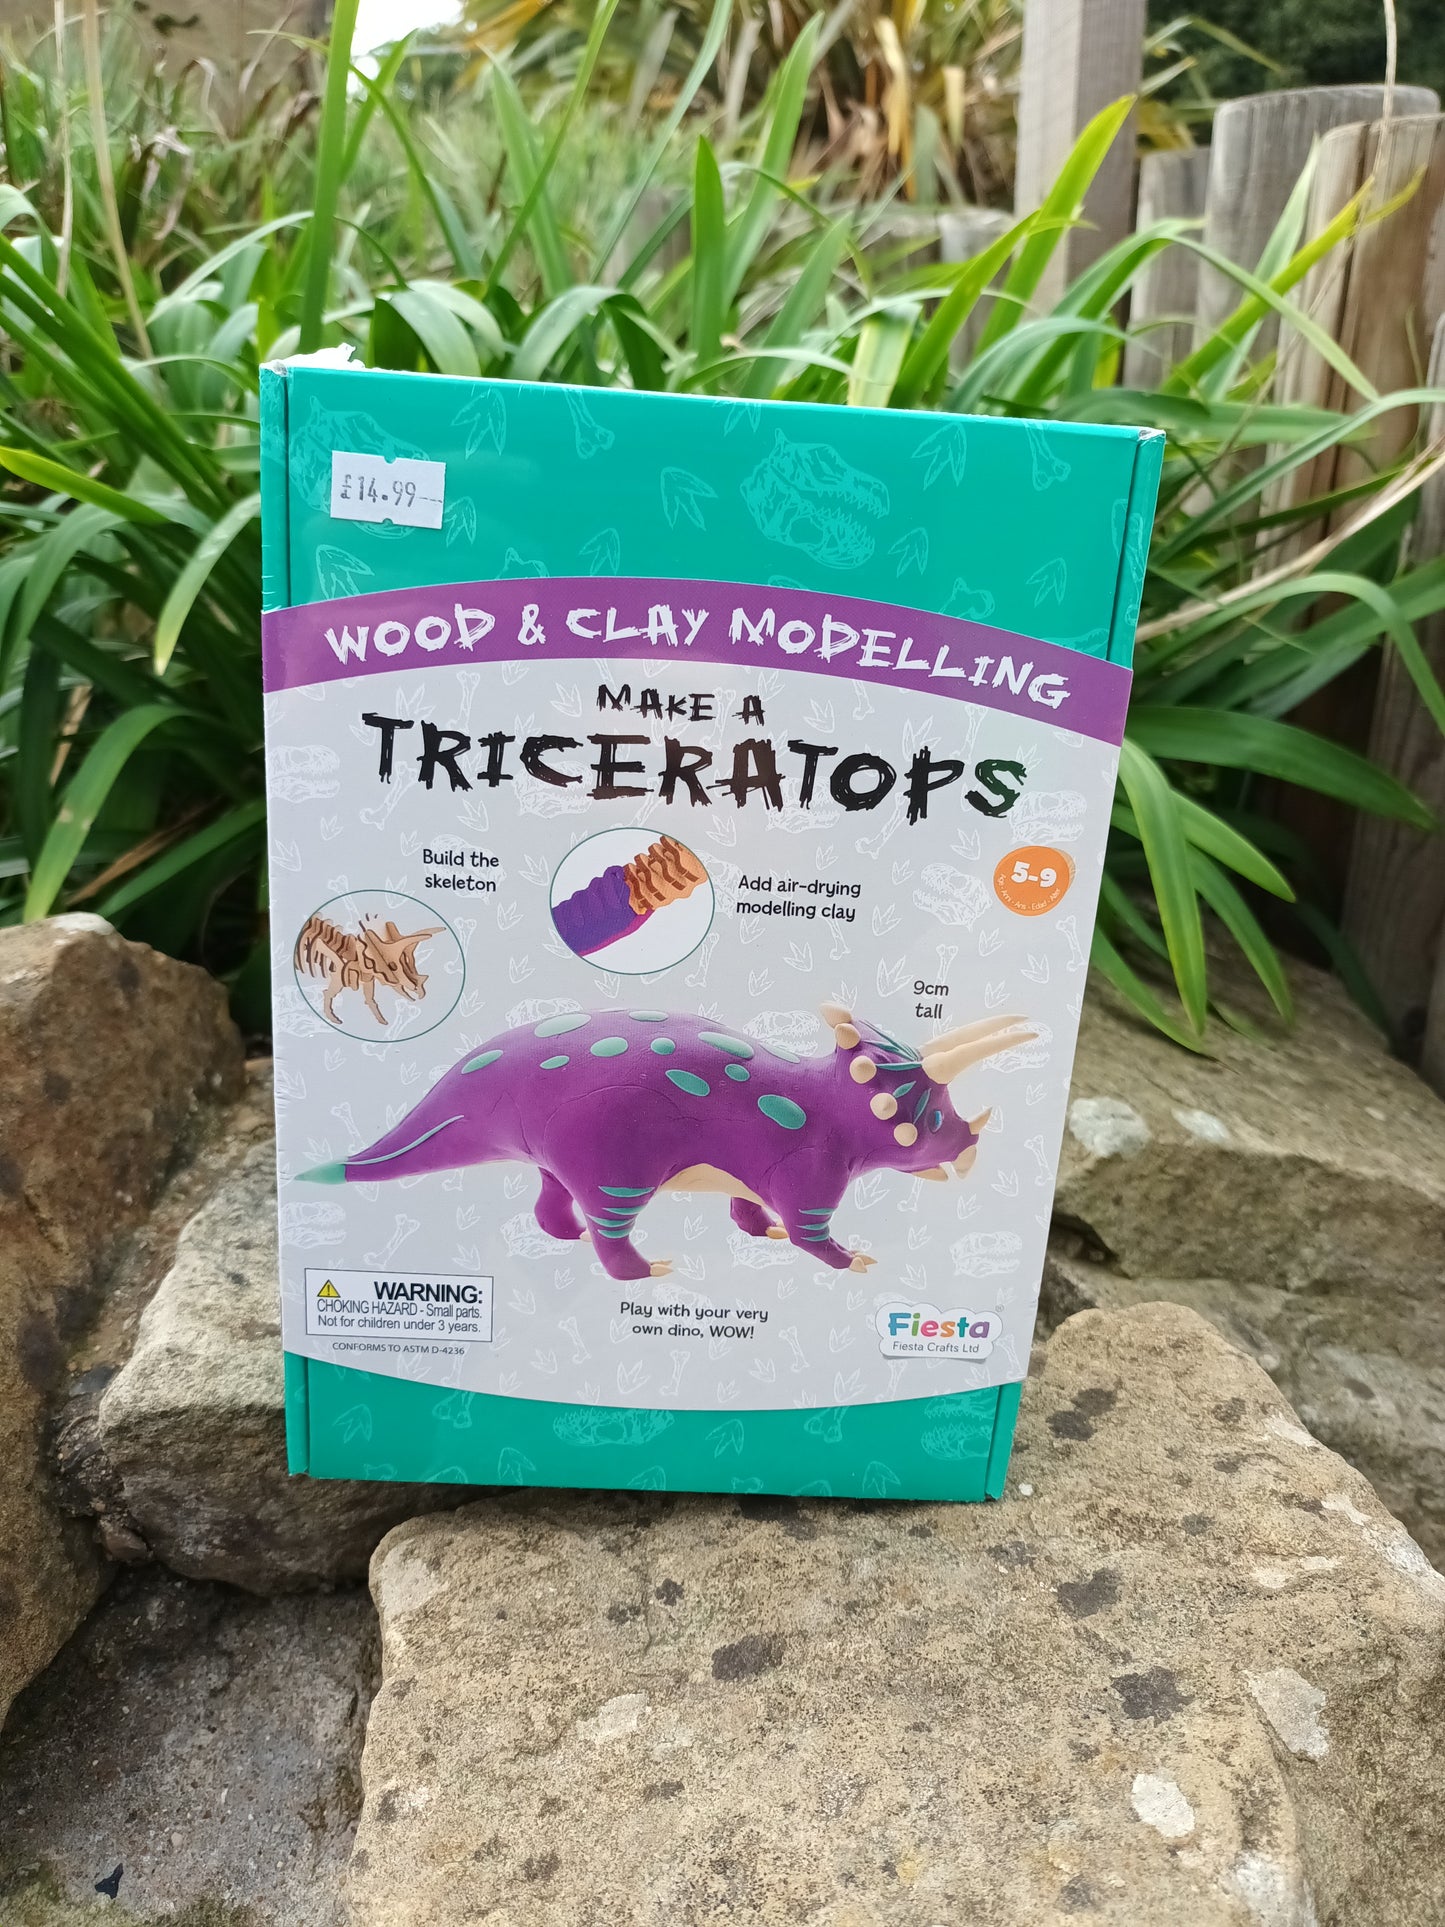 Make a Triceratops - Wood and Clay Modelling